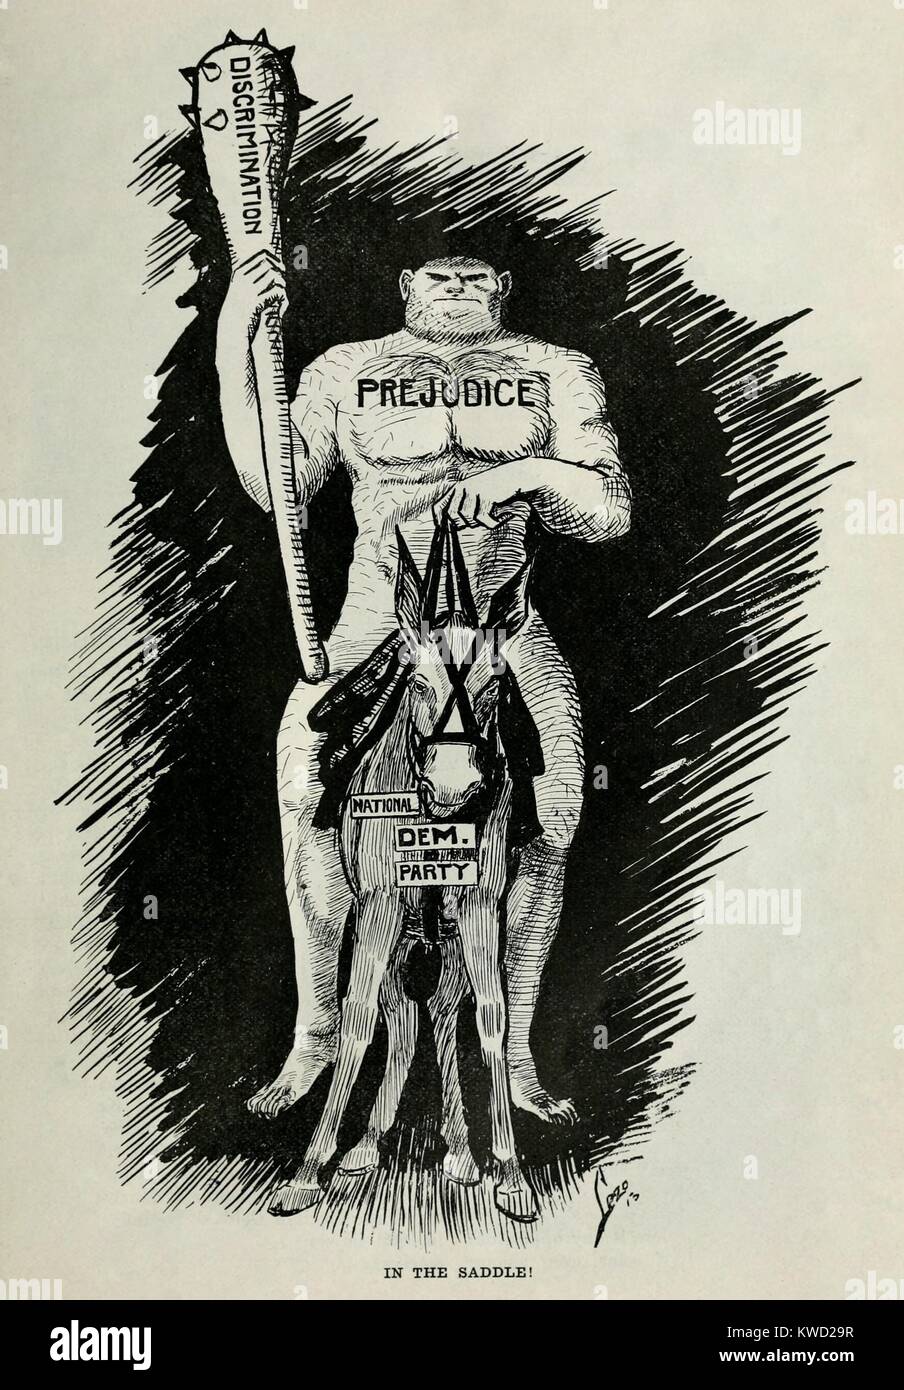 Anti-Democratic Party political cartoon from THE CRISIS, 1910. A brutish figure mounted on a donkey symbolizing the National Democatic Party is armed with a club labeled, DISCRIMINATION.  (BSLOC 2017 20 72) Stock Photo